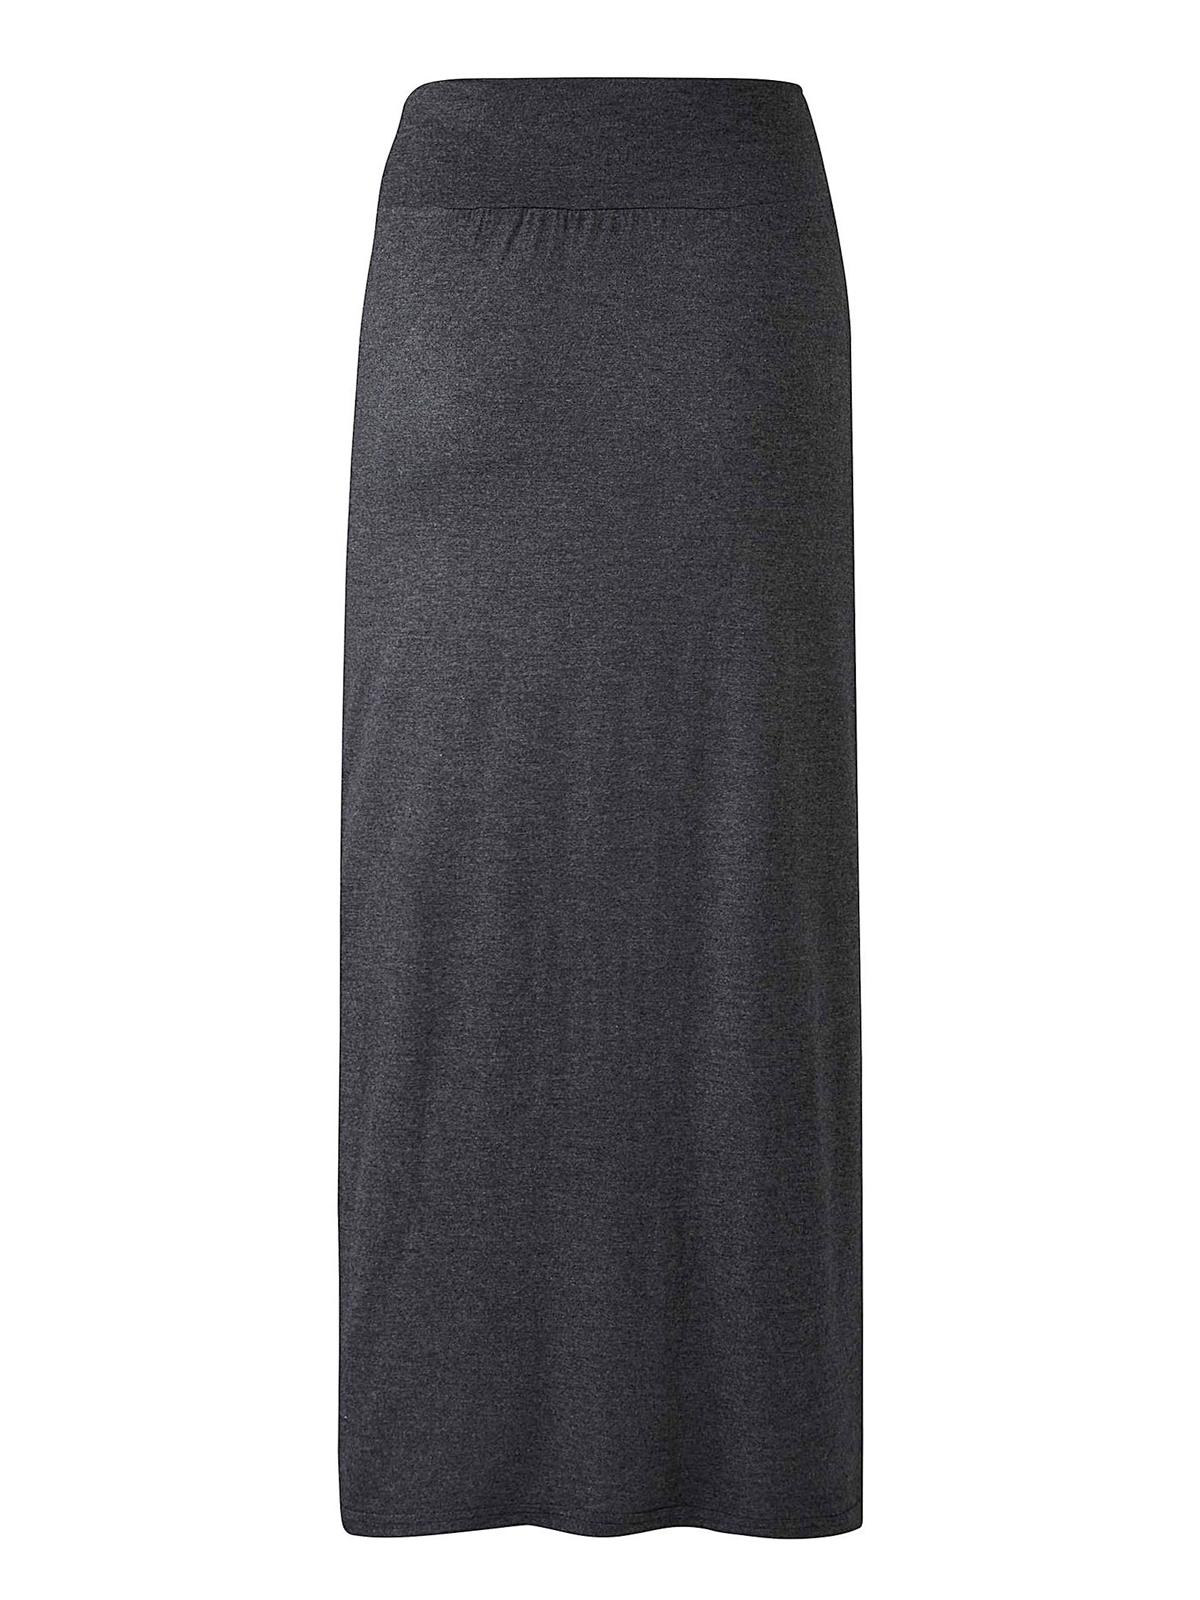 Together GREY Pull On Jersey Maxi Skirt - Plus Size 16